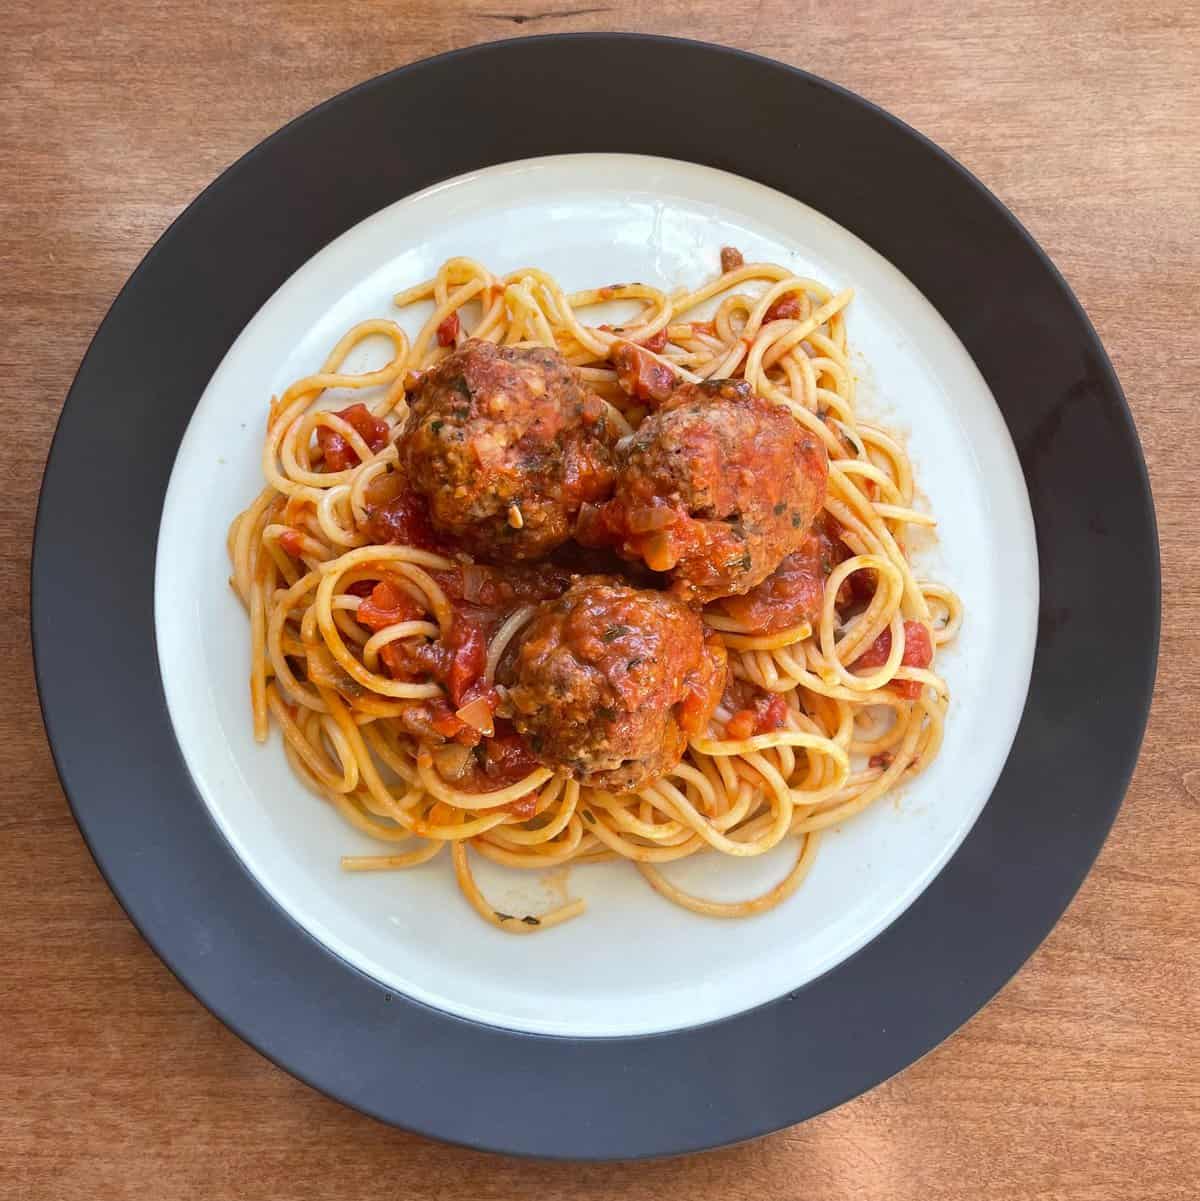 A plate of spaghetti with three braised meatballs in tomato sauce.